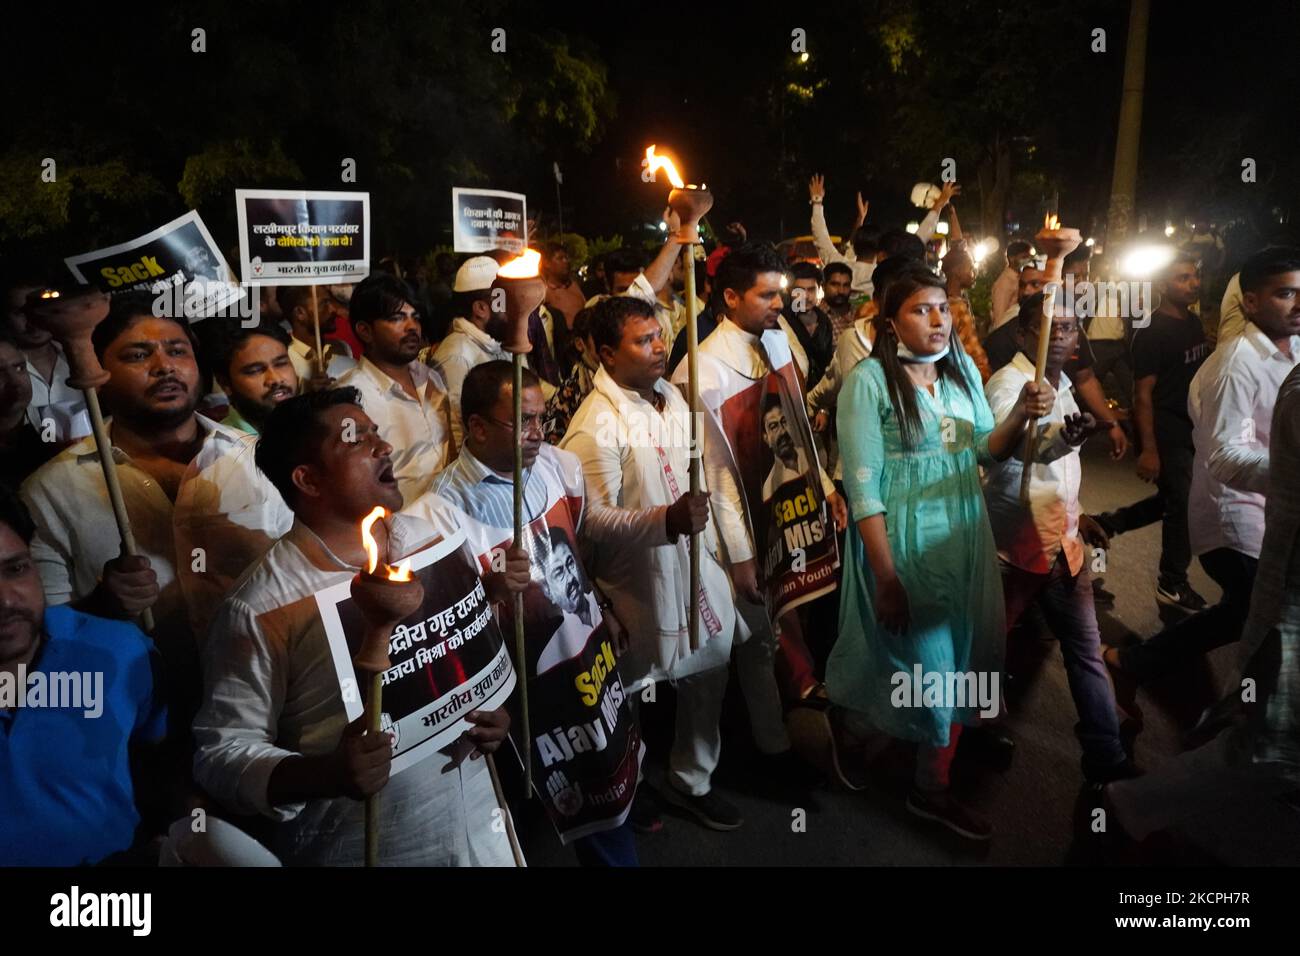 Activists of the Indian Youth Congress (IYC) party hold torches as they shout slogans during a protest against killing of four farmers in Uttar Pradesh's Lakhimpur Kheri after being run over by a car owned by India's Union Minister of State for Home, in New Delhi, India on October 13, 2021. (Photo by Mayank Makhija/NurPhoto) Stock Photo